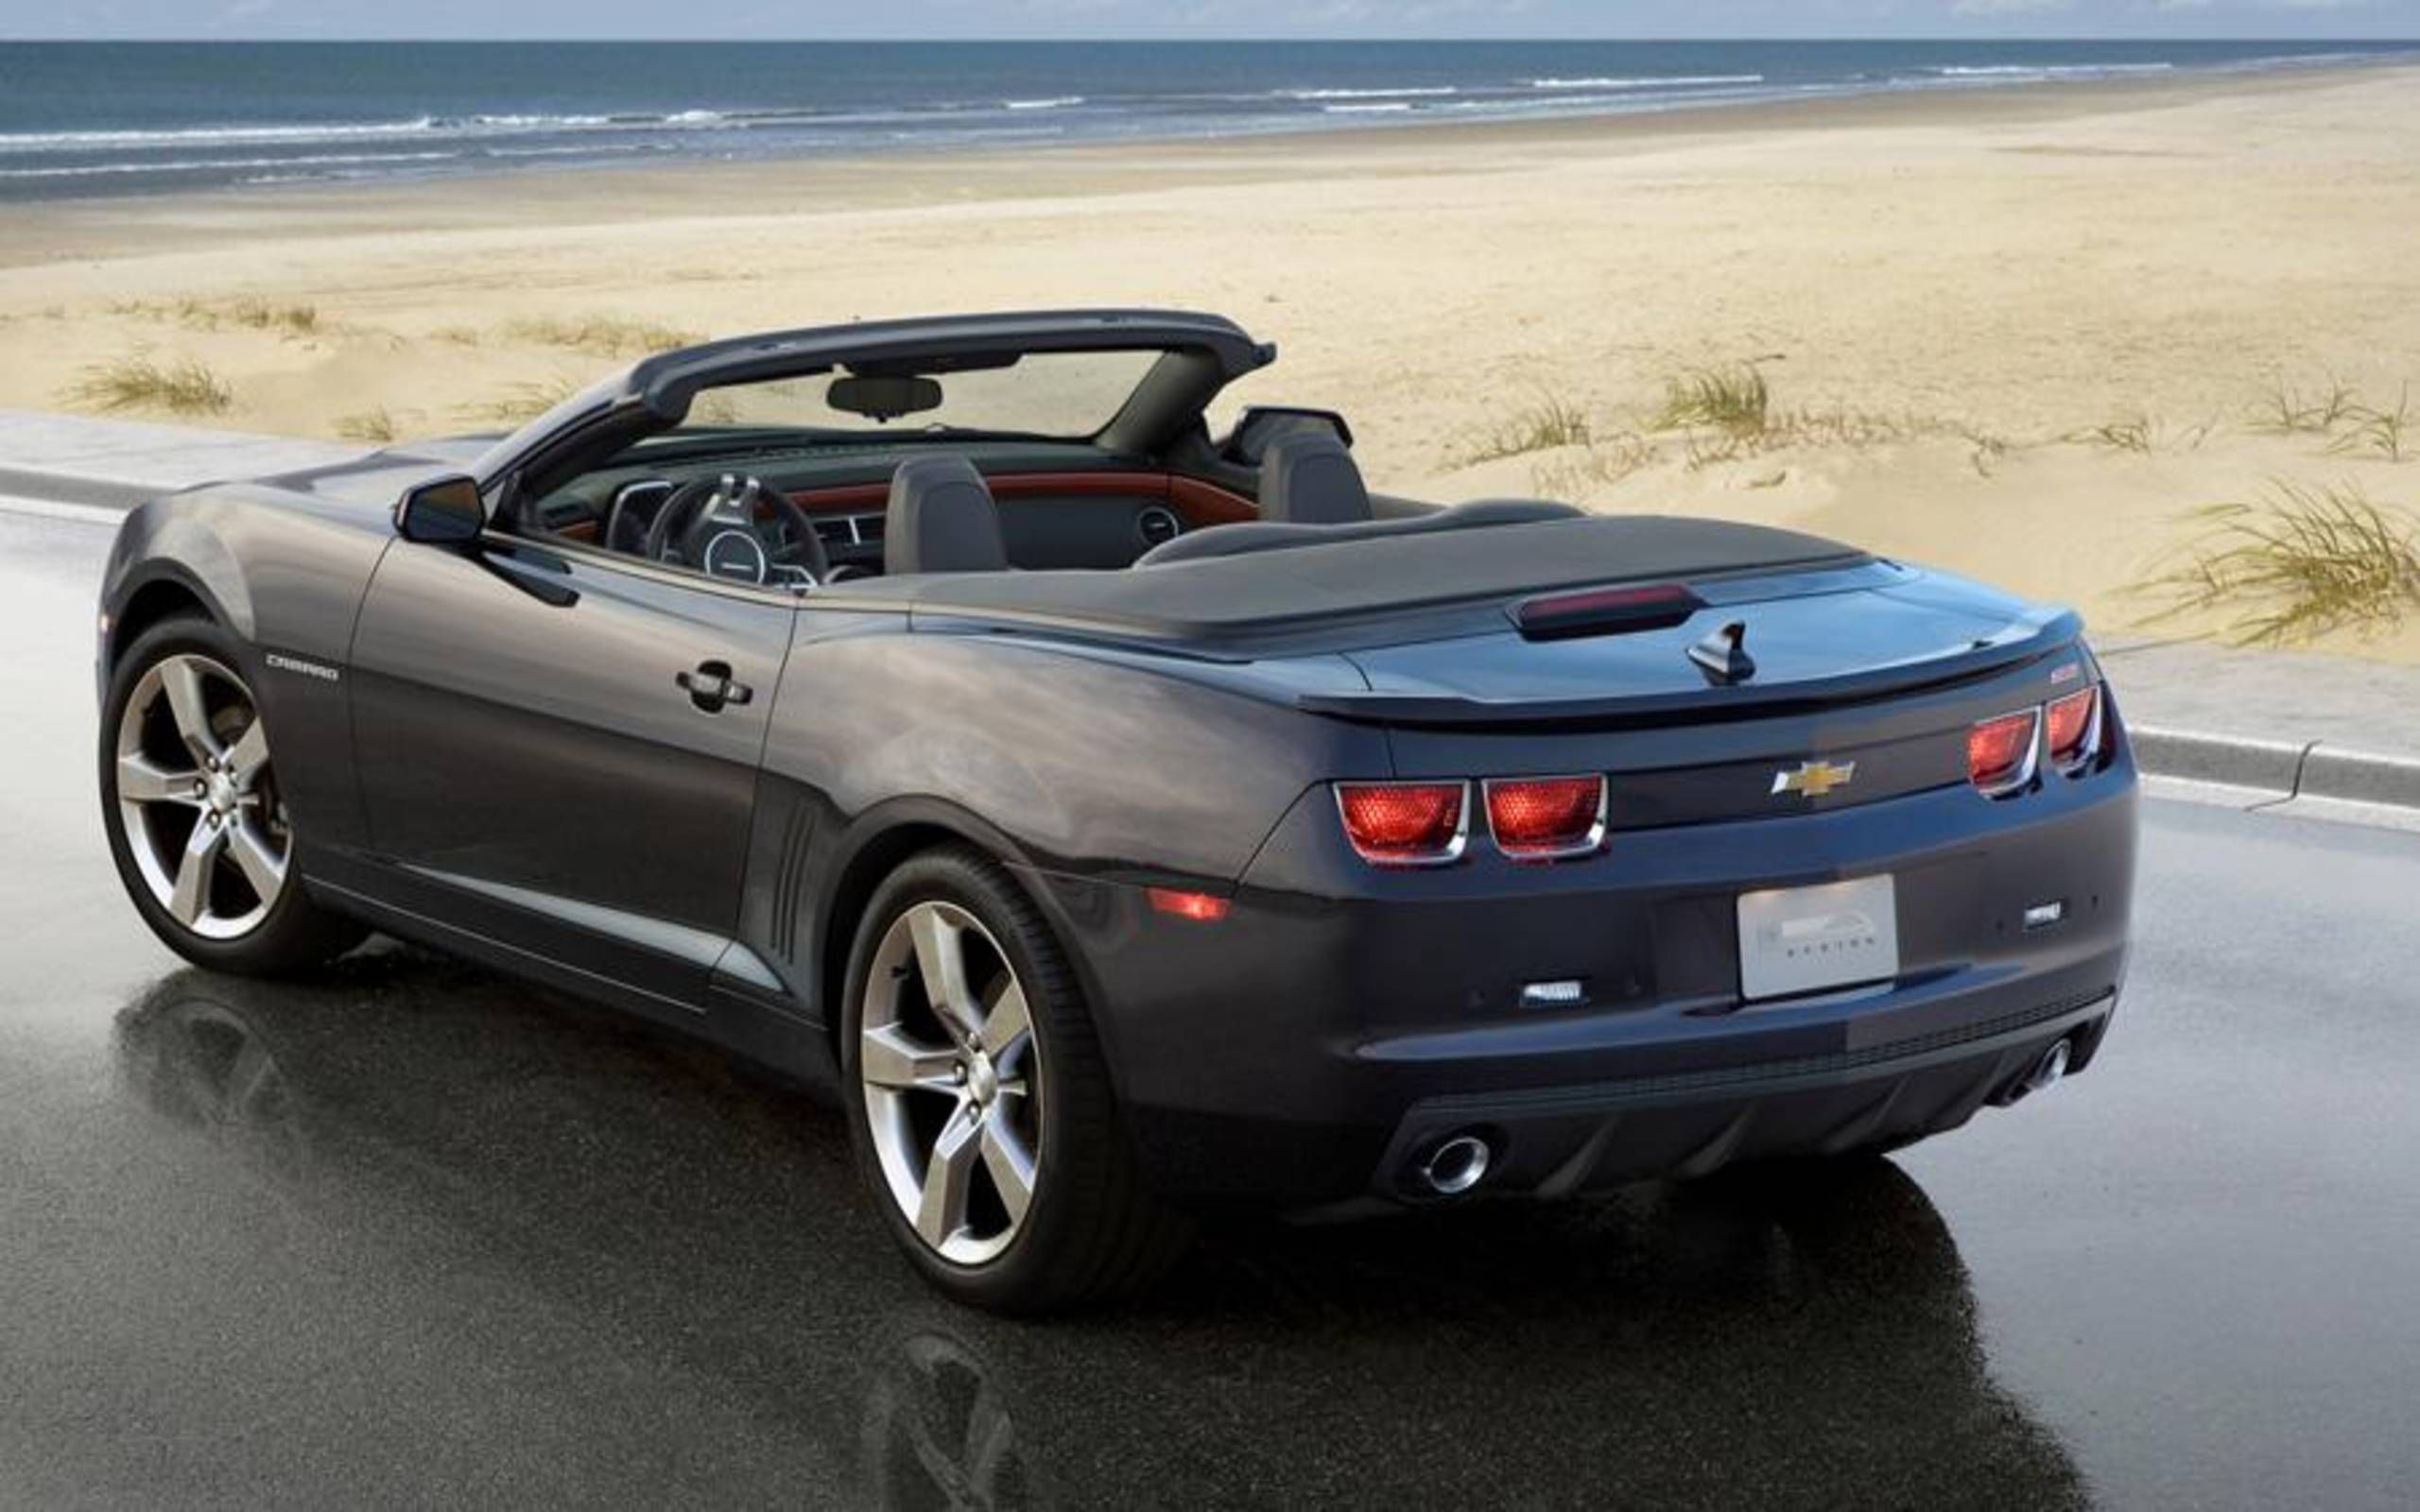 Chevrolet sets base price for the 2011 Camaro convertible at $30,000